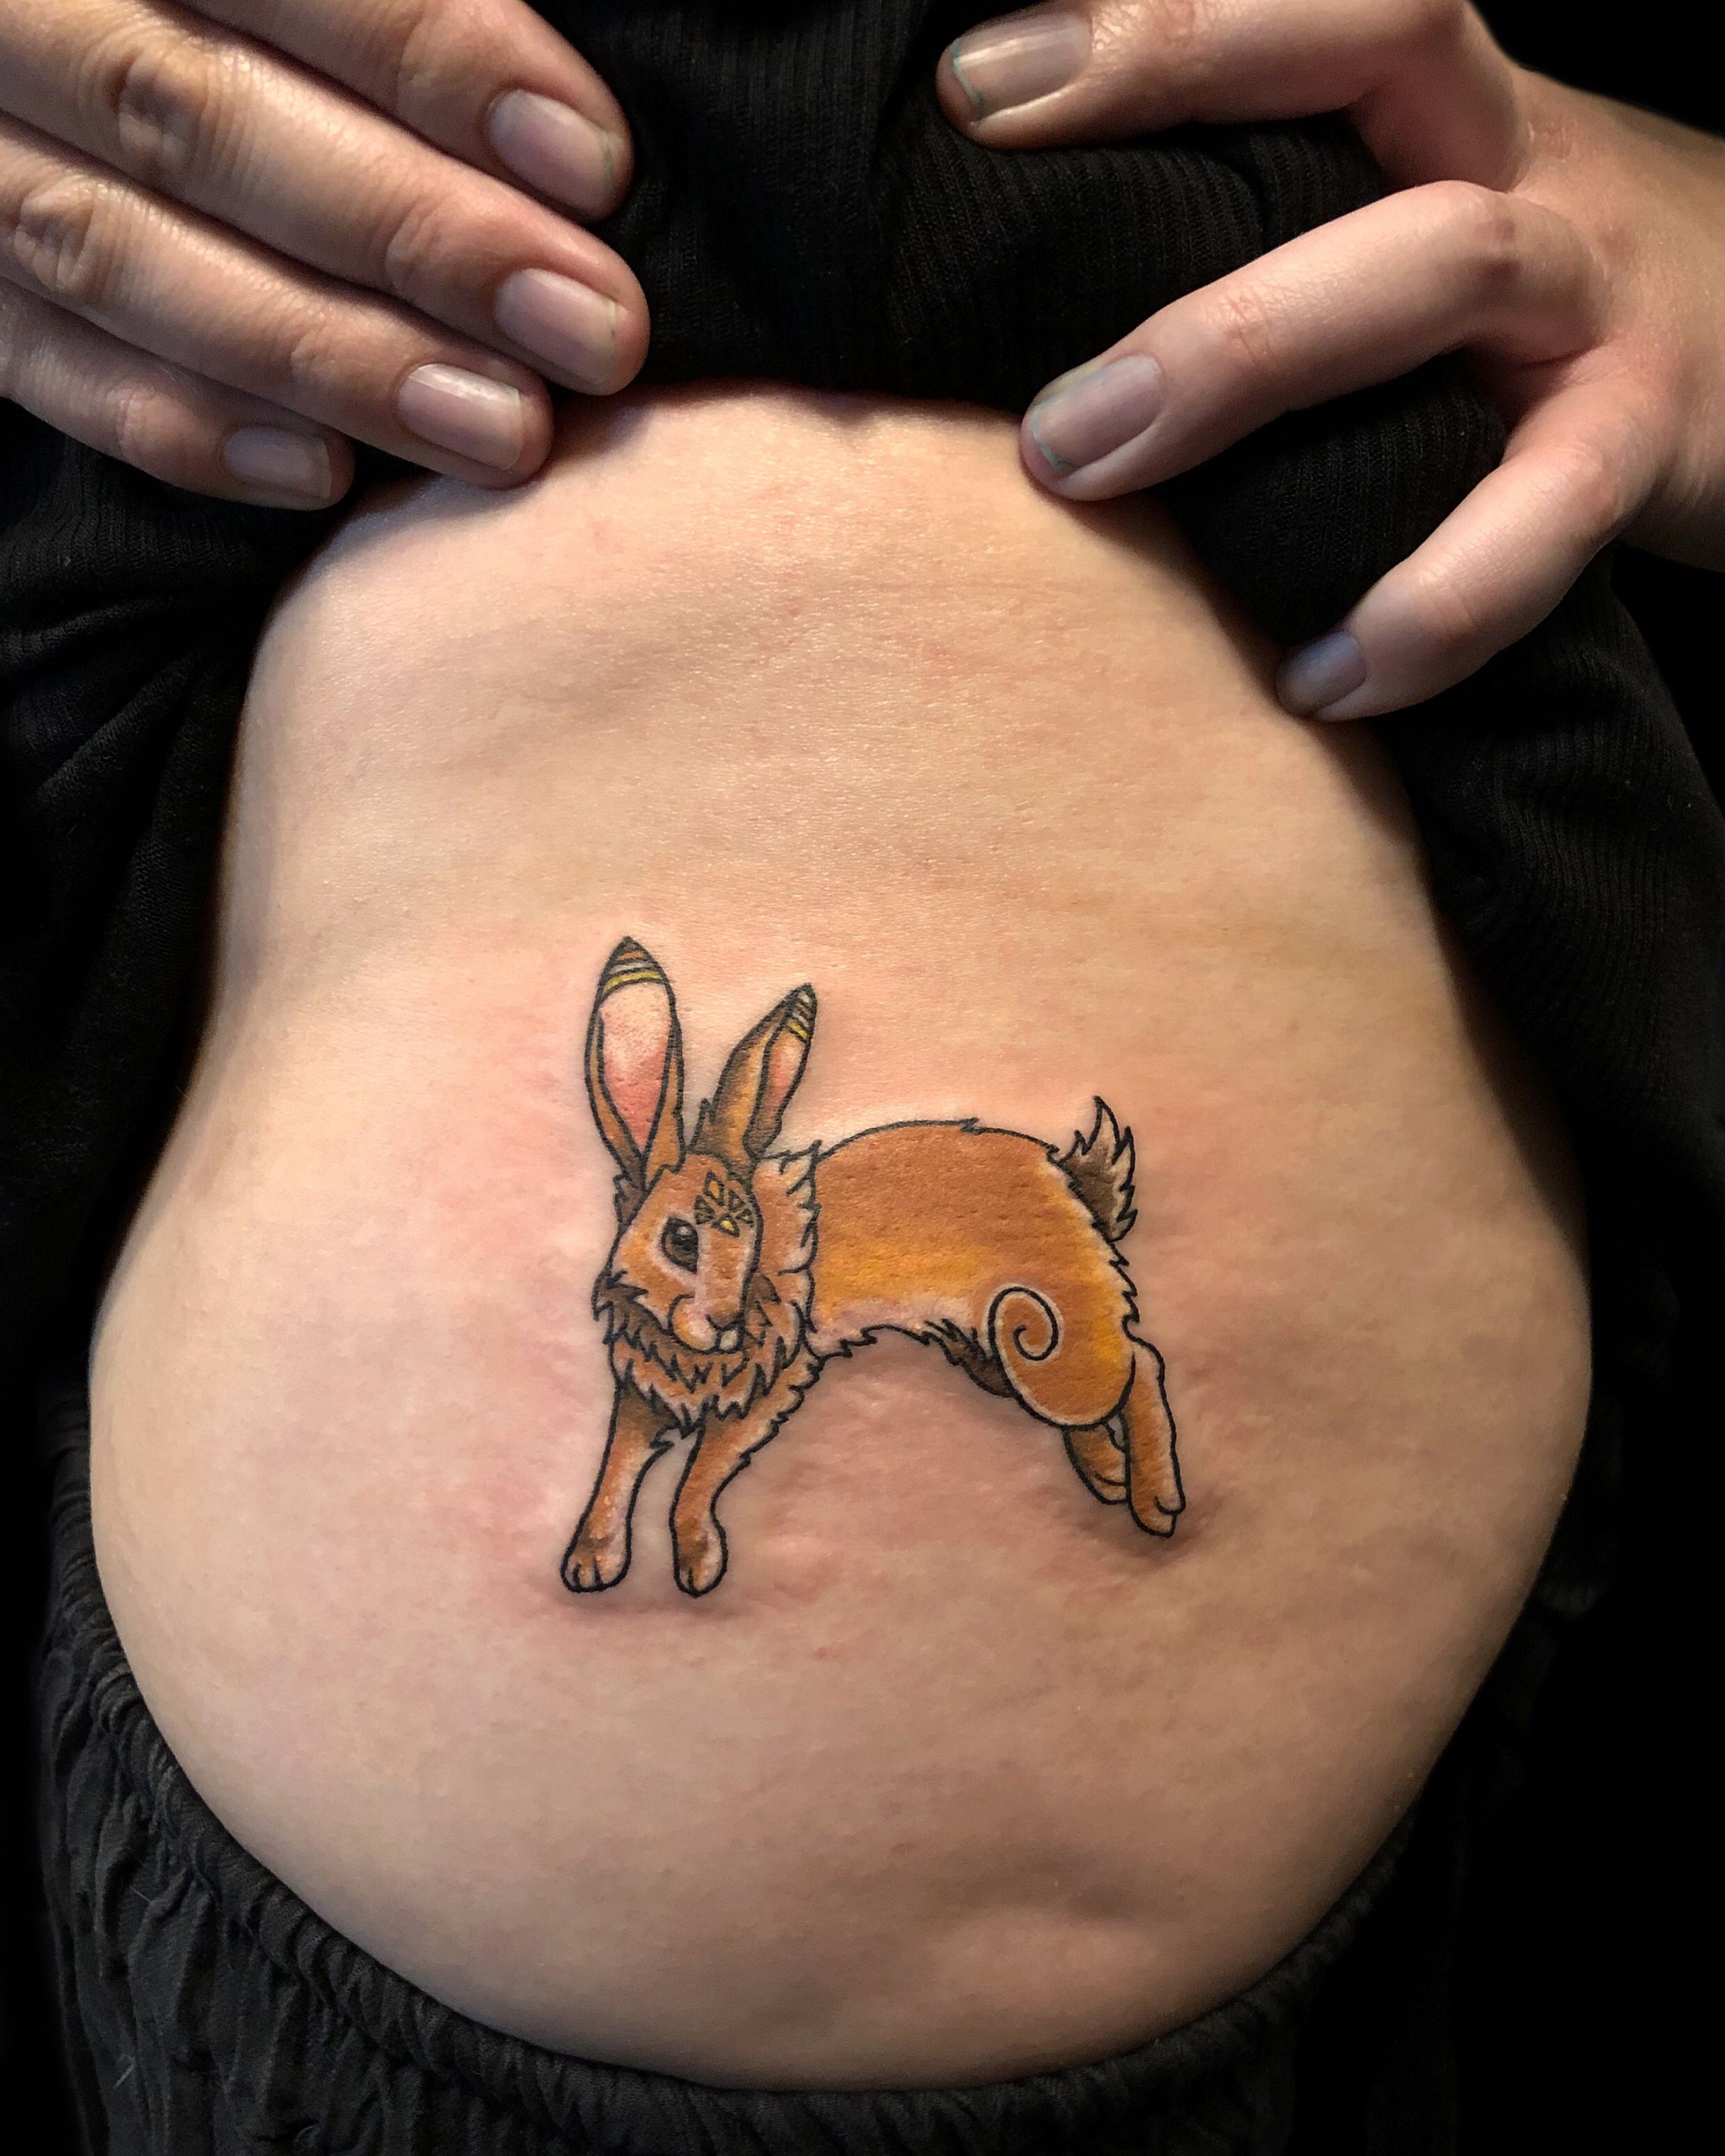 My first Tattoo inspired by Watership Down  YouTube